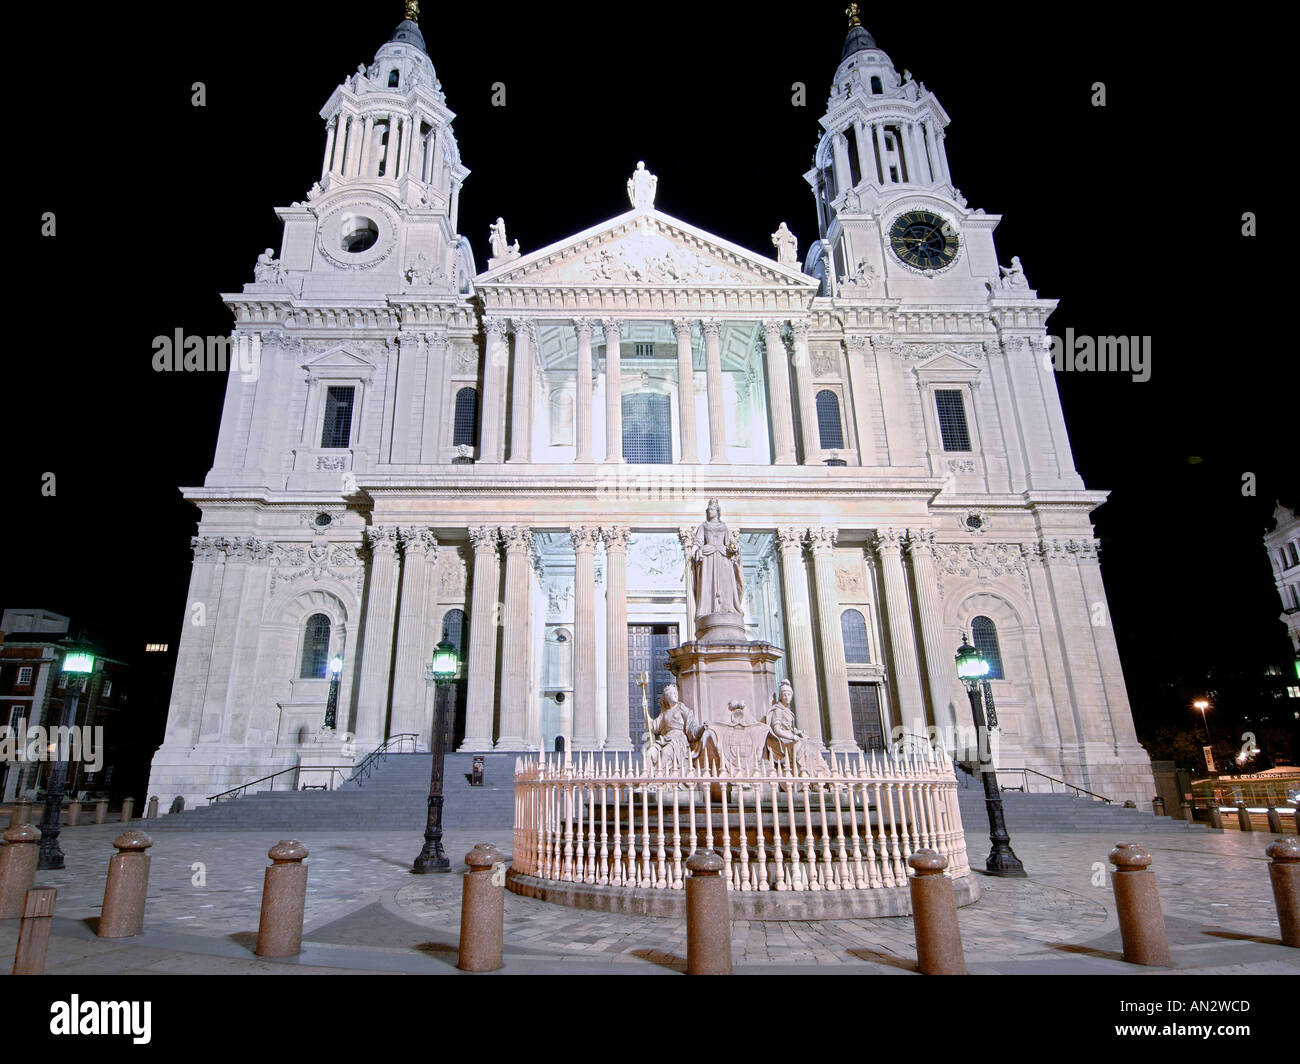 The front entrance and main facade of St Paul's cathedral in London at night. Stock Photo